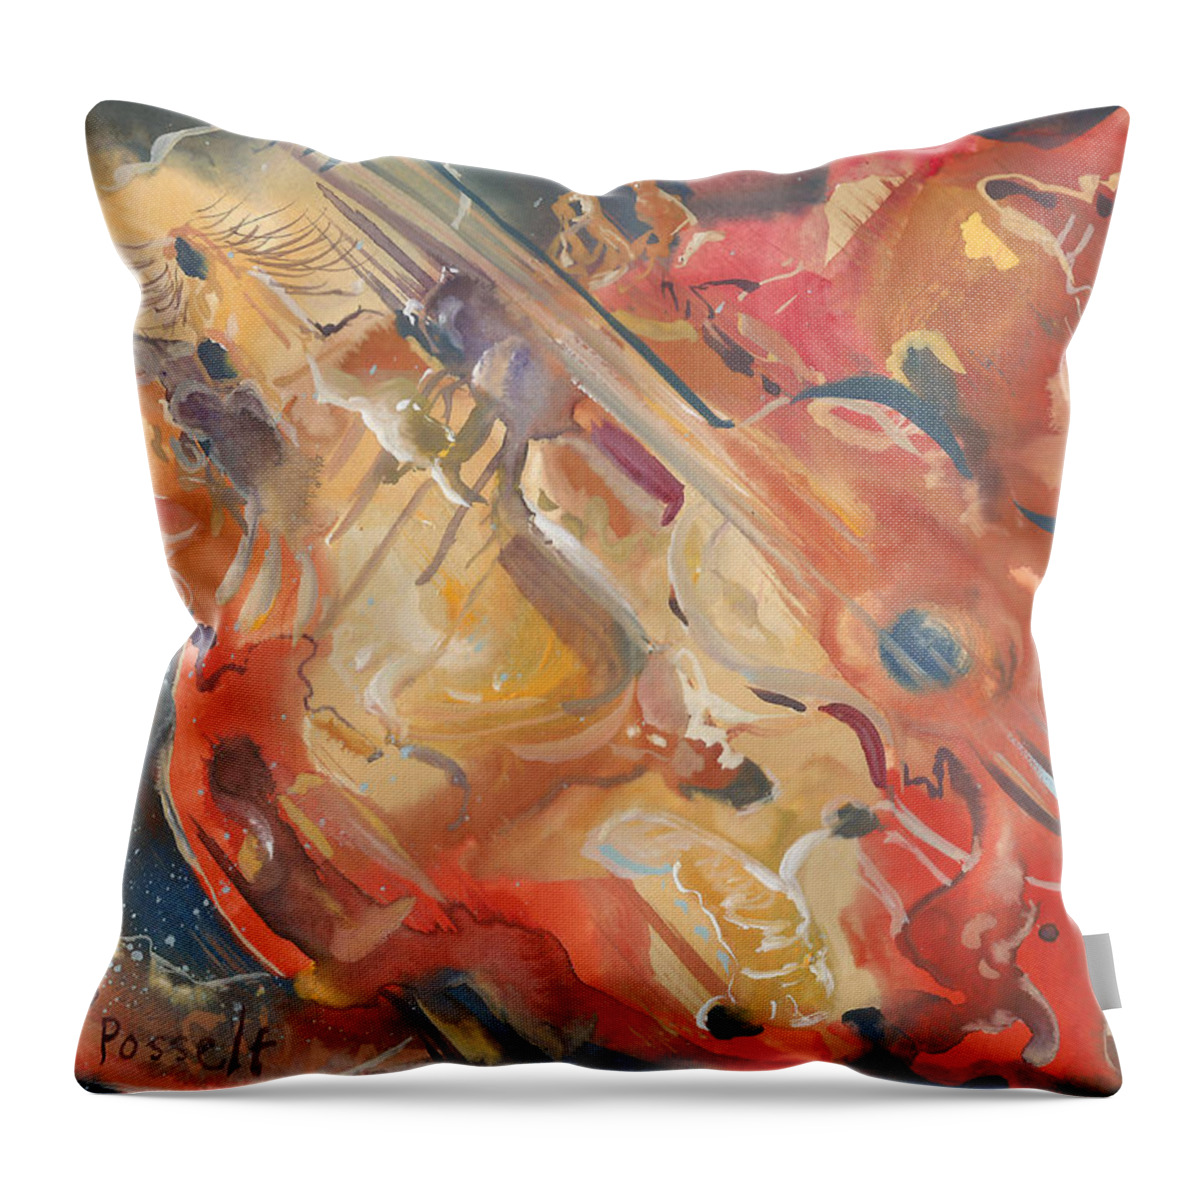 Intimate Guitar Throw Pillow featuring the painting Intimate Guitar by Sheri Jo Posselt